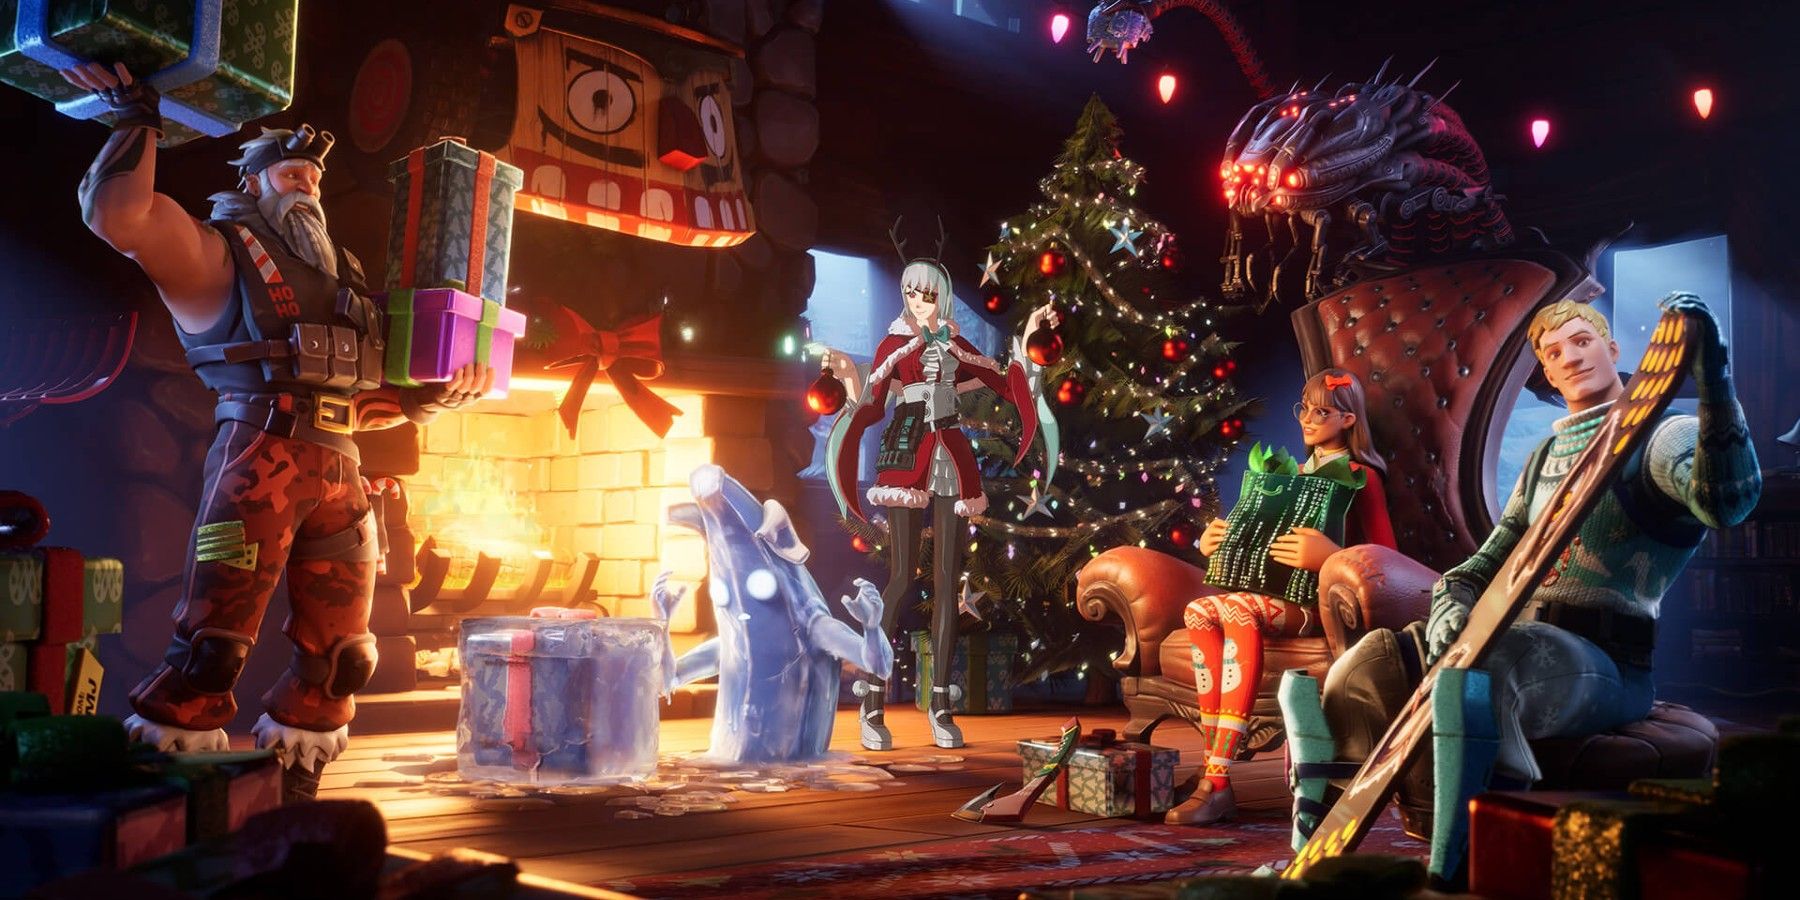 Fortnite When Is the Winterfest Event?